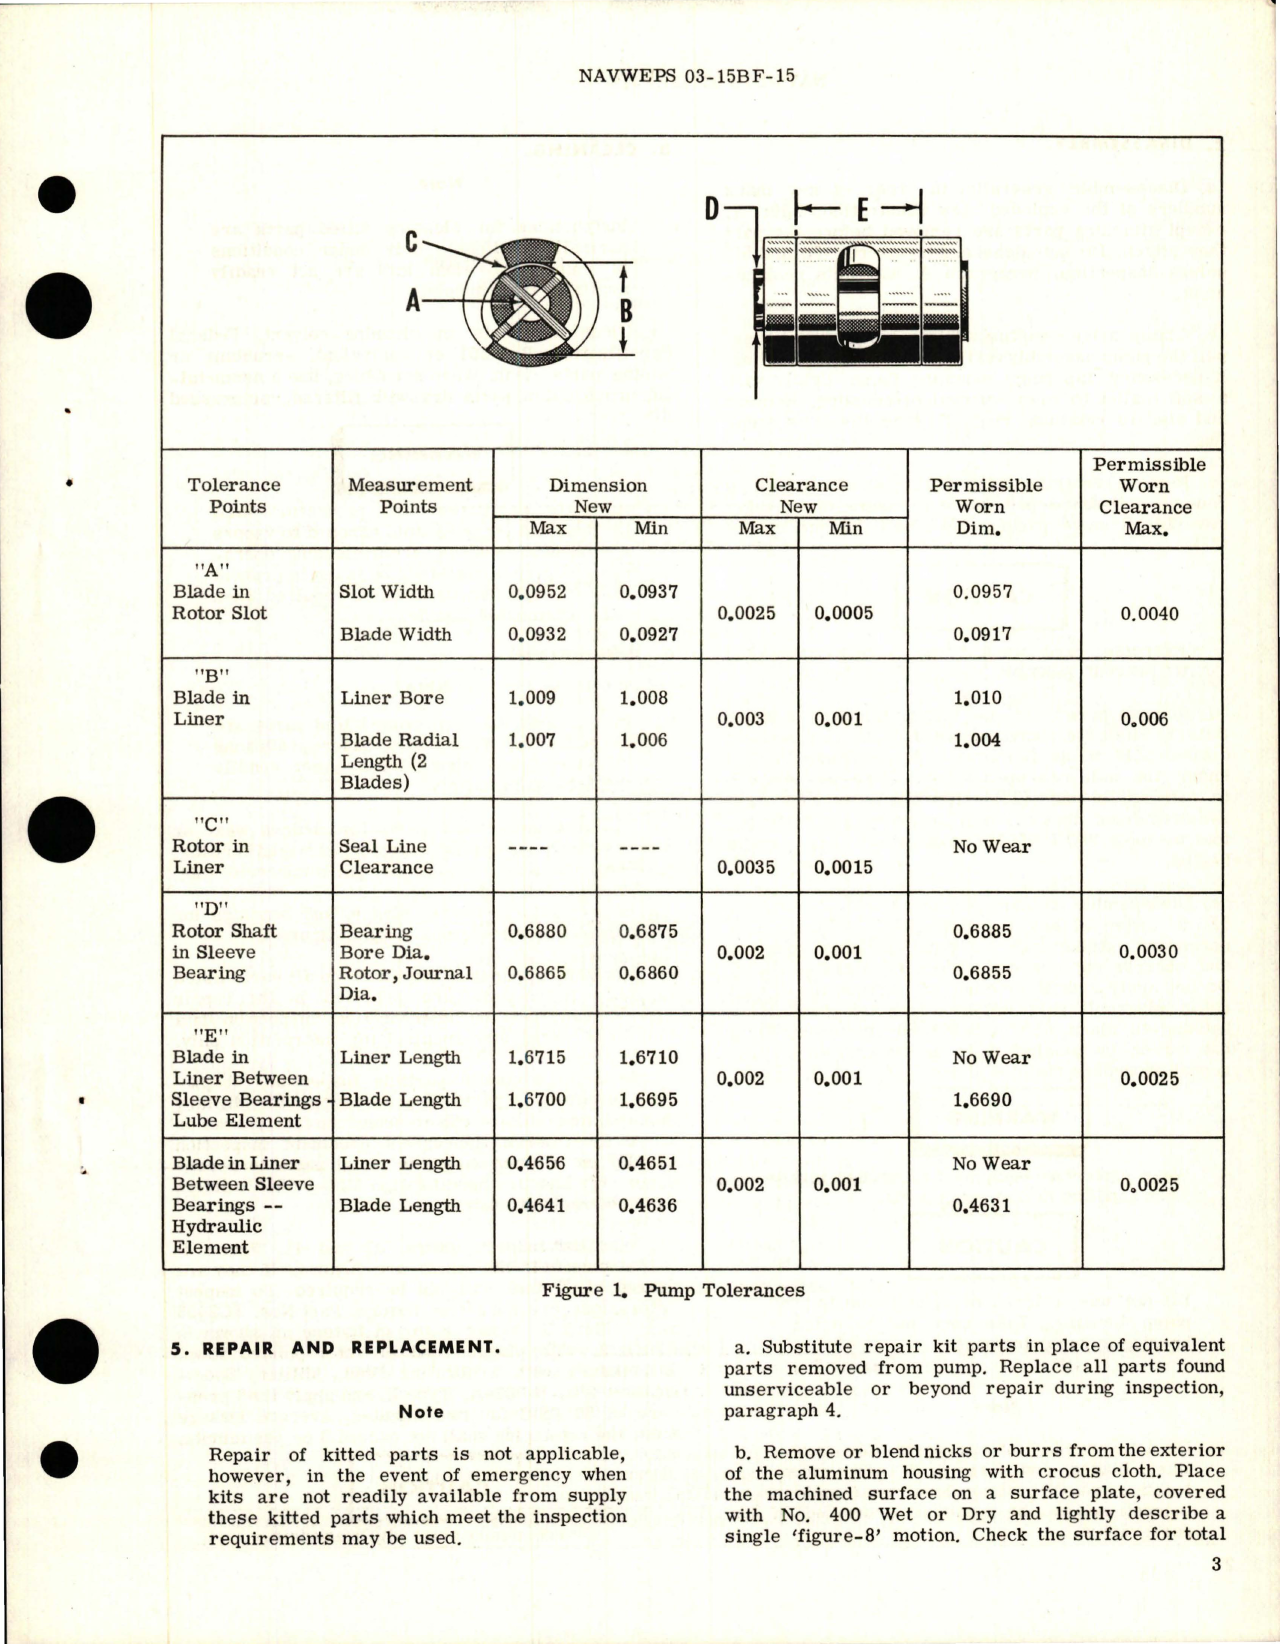 Sample page 5 from AirCorps Library document: Overhaul Instructions with Illustrated Parts for Lube Oil and Hydraulic Pump - Model RR16000B and RR16000C